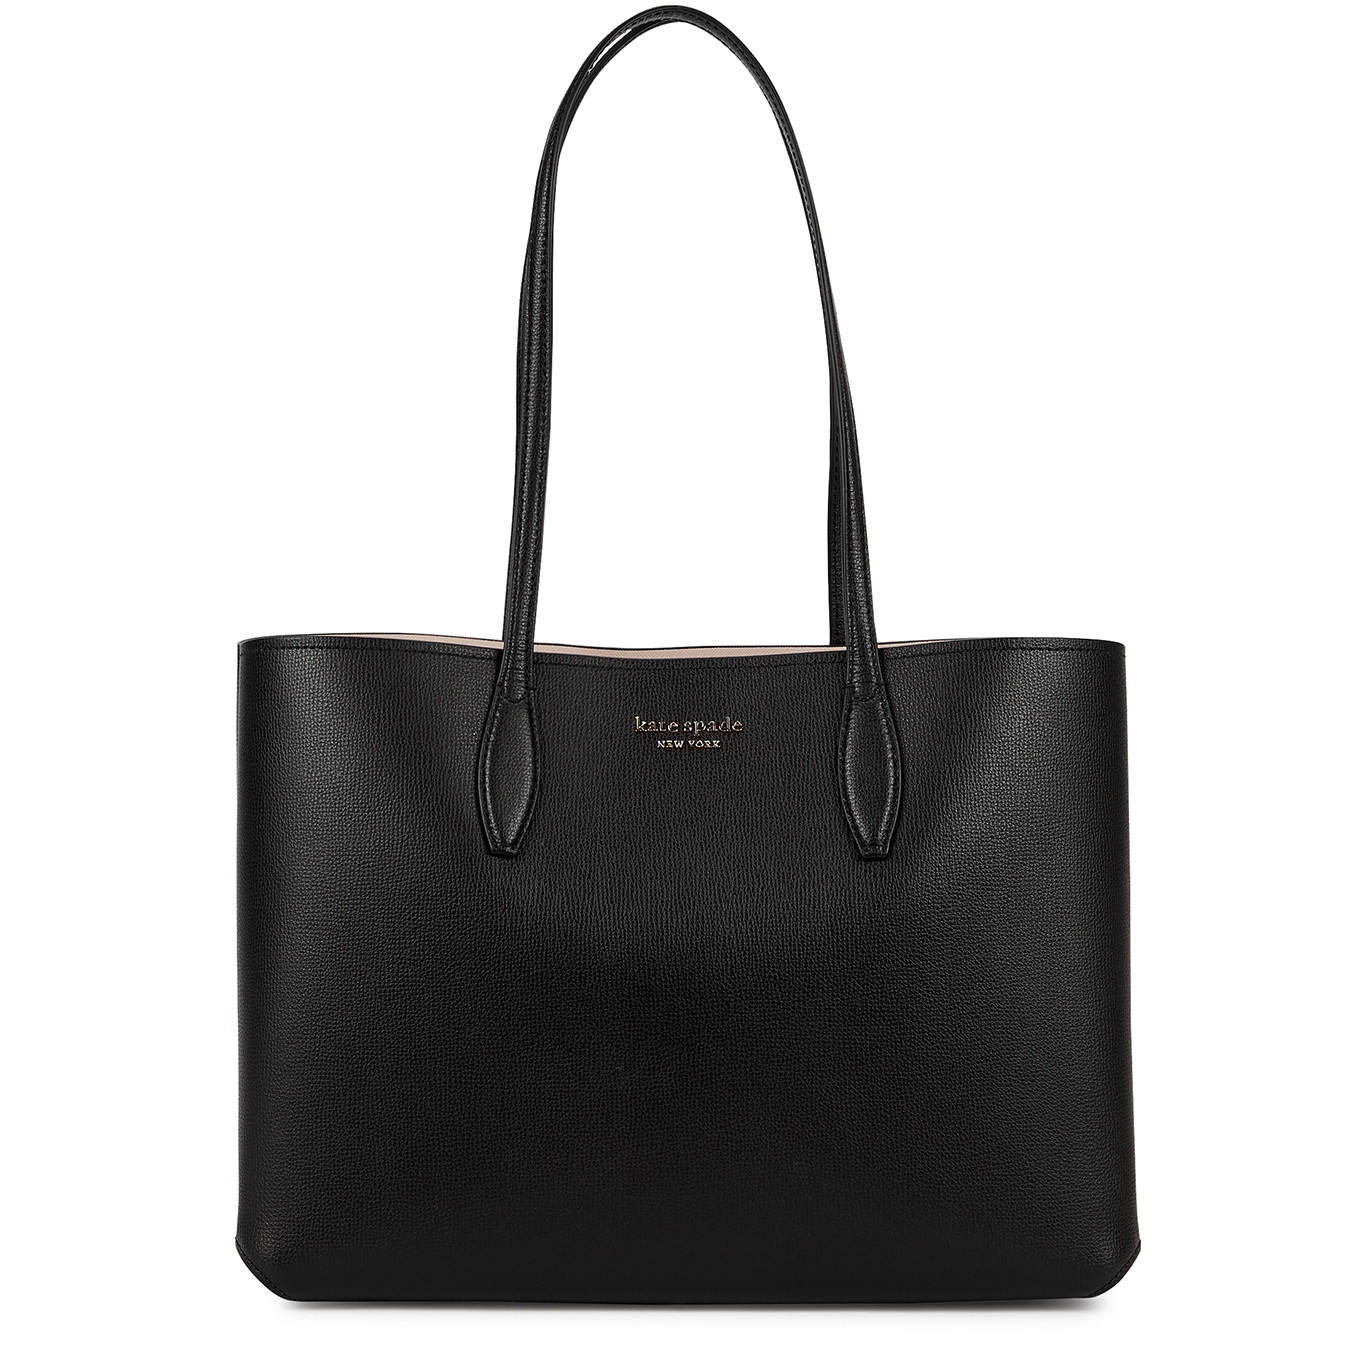 Kate Spade New York All Day Large Black Leather Tote